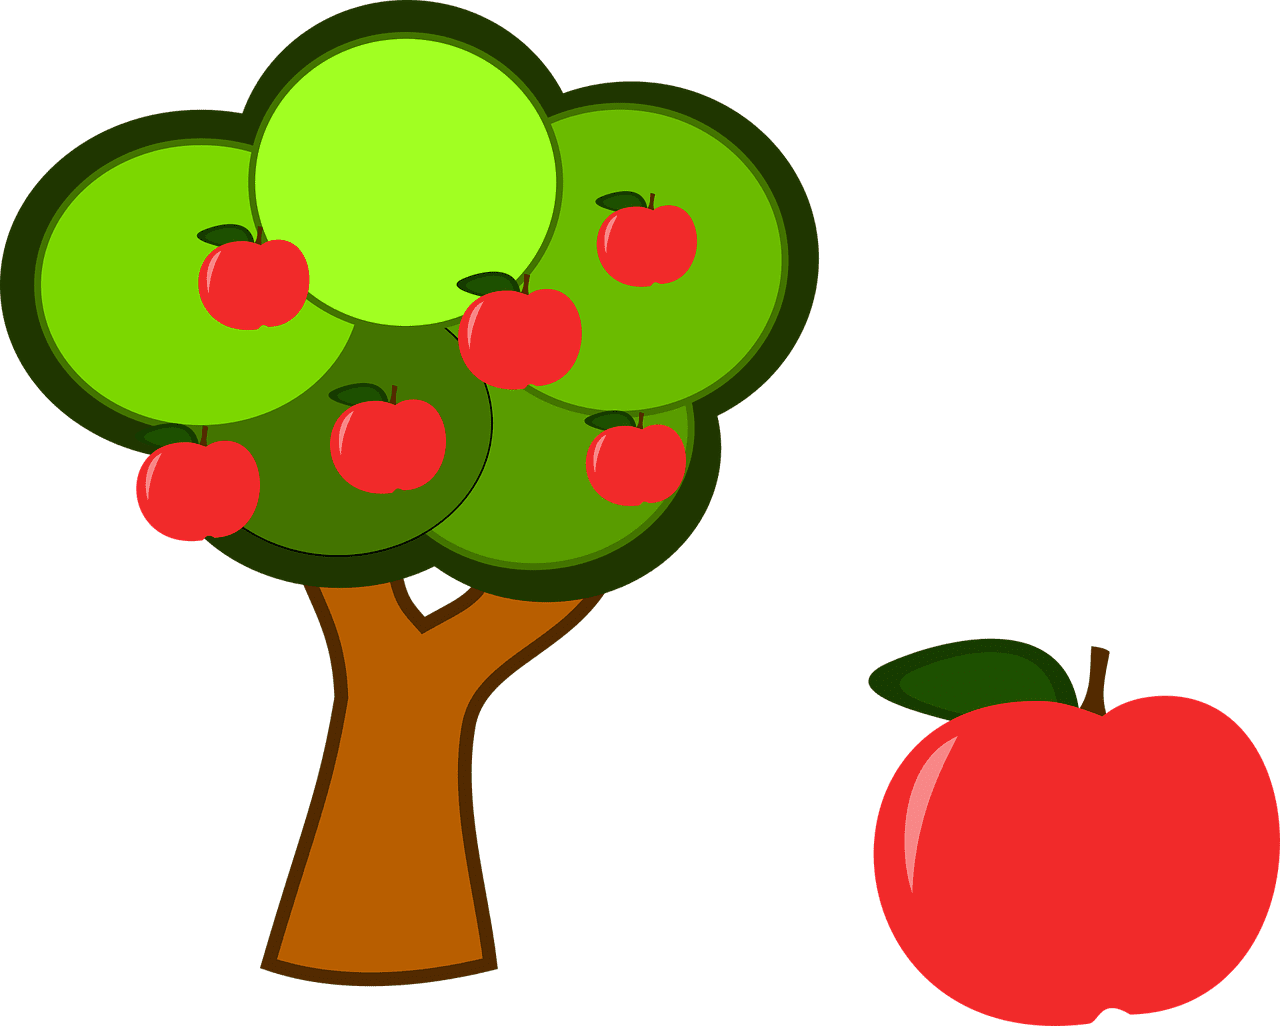 Apple tree fruit red vector clipart